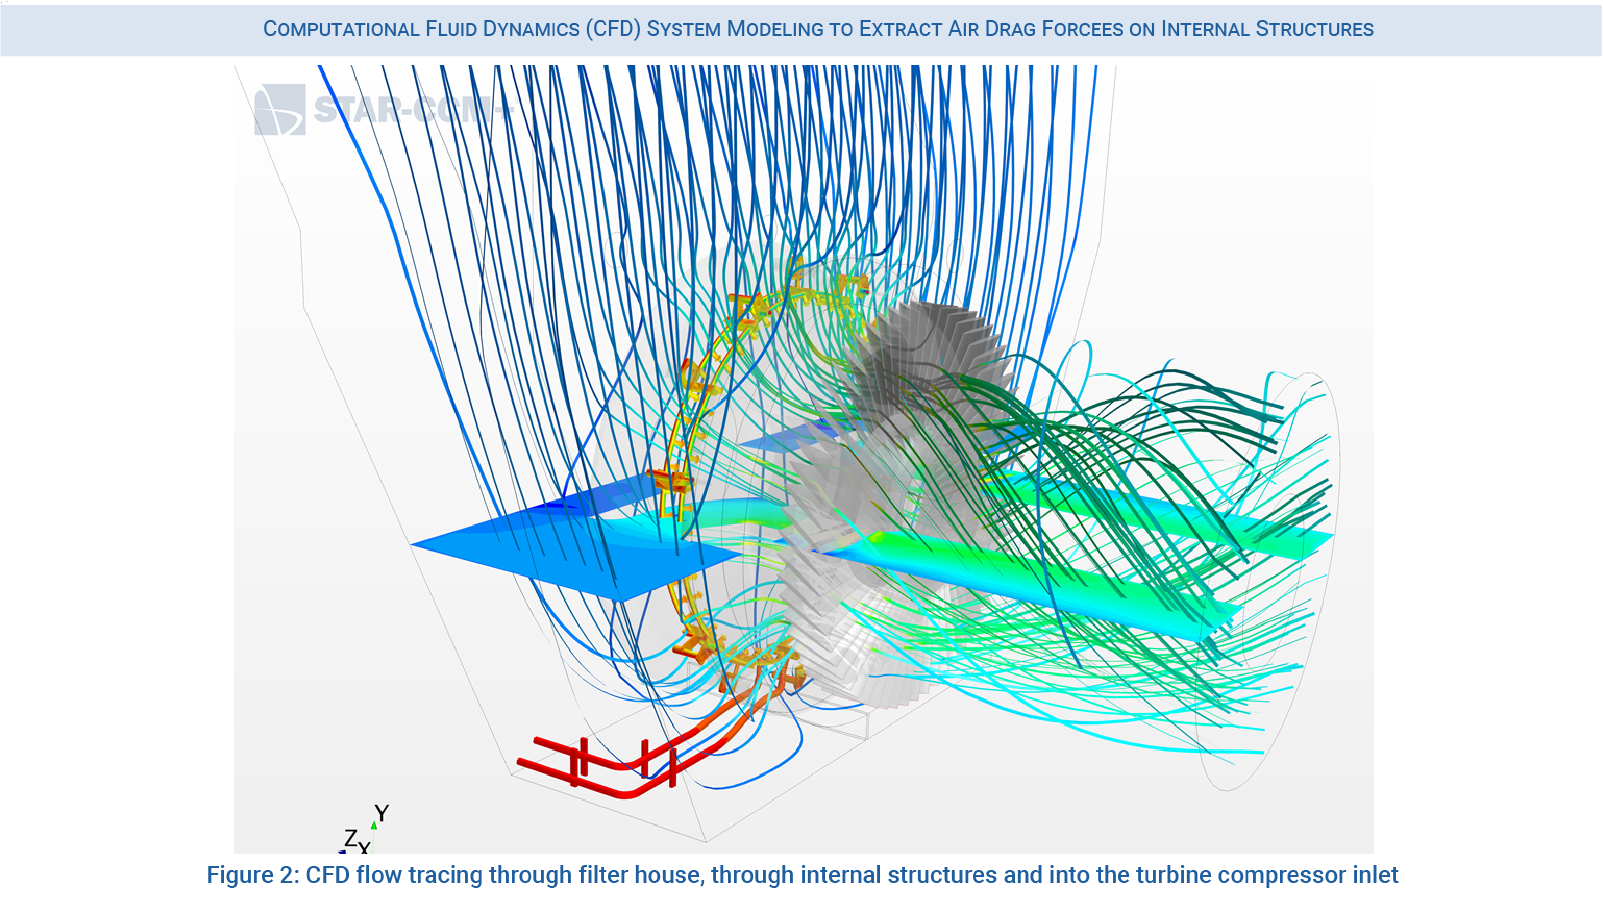 CFD flow tracing through filter house, through wet compression device and into gas turbine compressor inlet